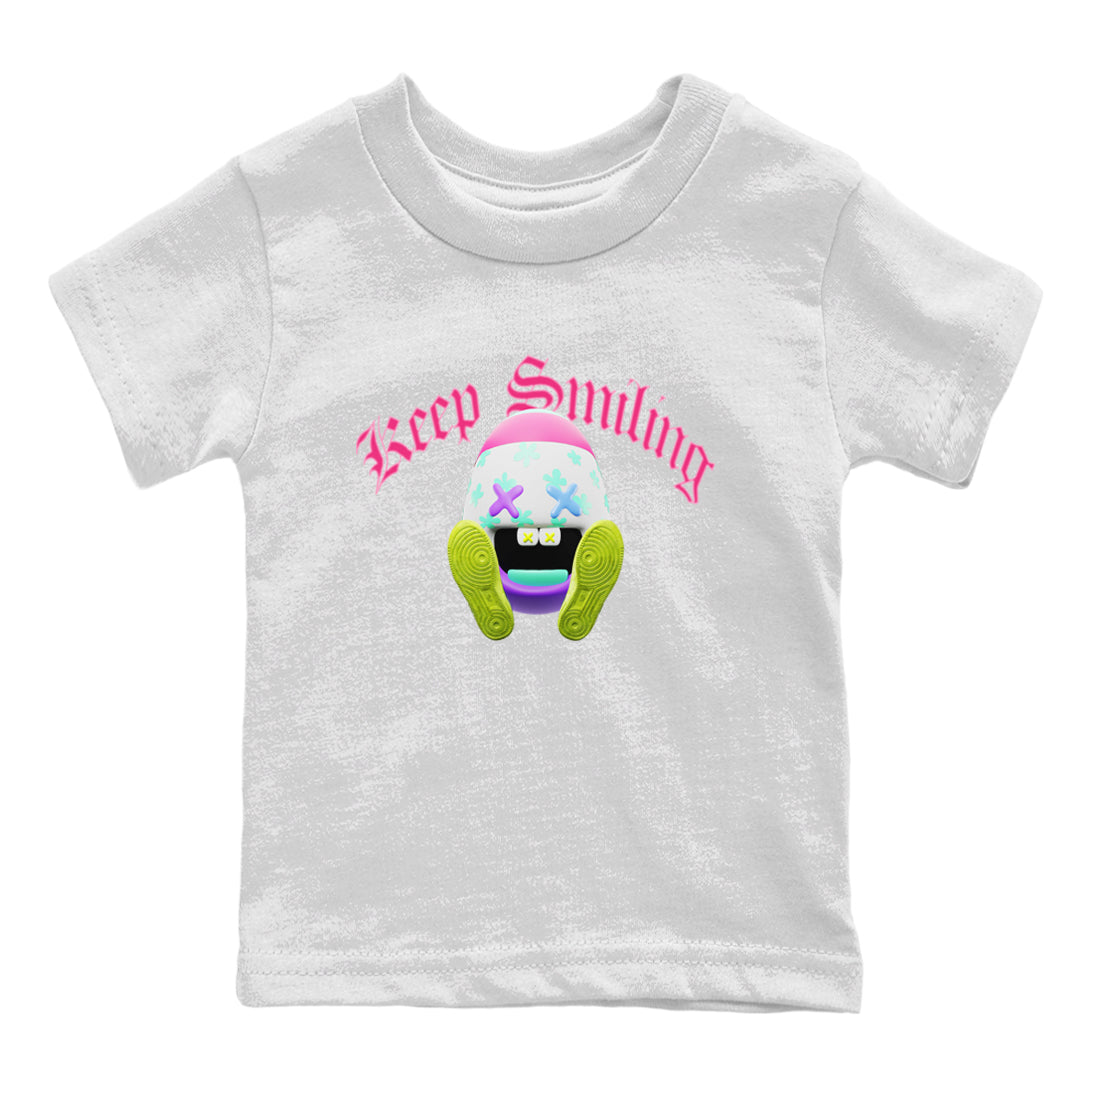 Dunk Easter Candy Sneaker Tees Drip Gear Zone Keep Smiling Sneaker Tees Nike Easter Shirt Kids Shirts White 2